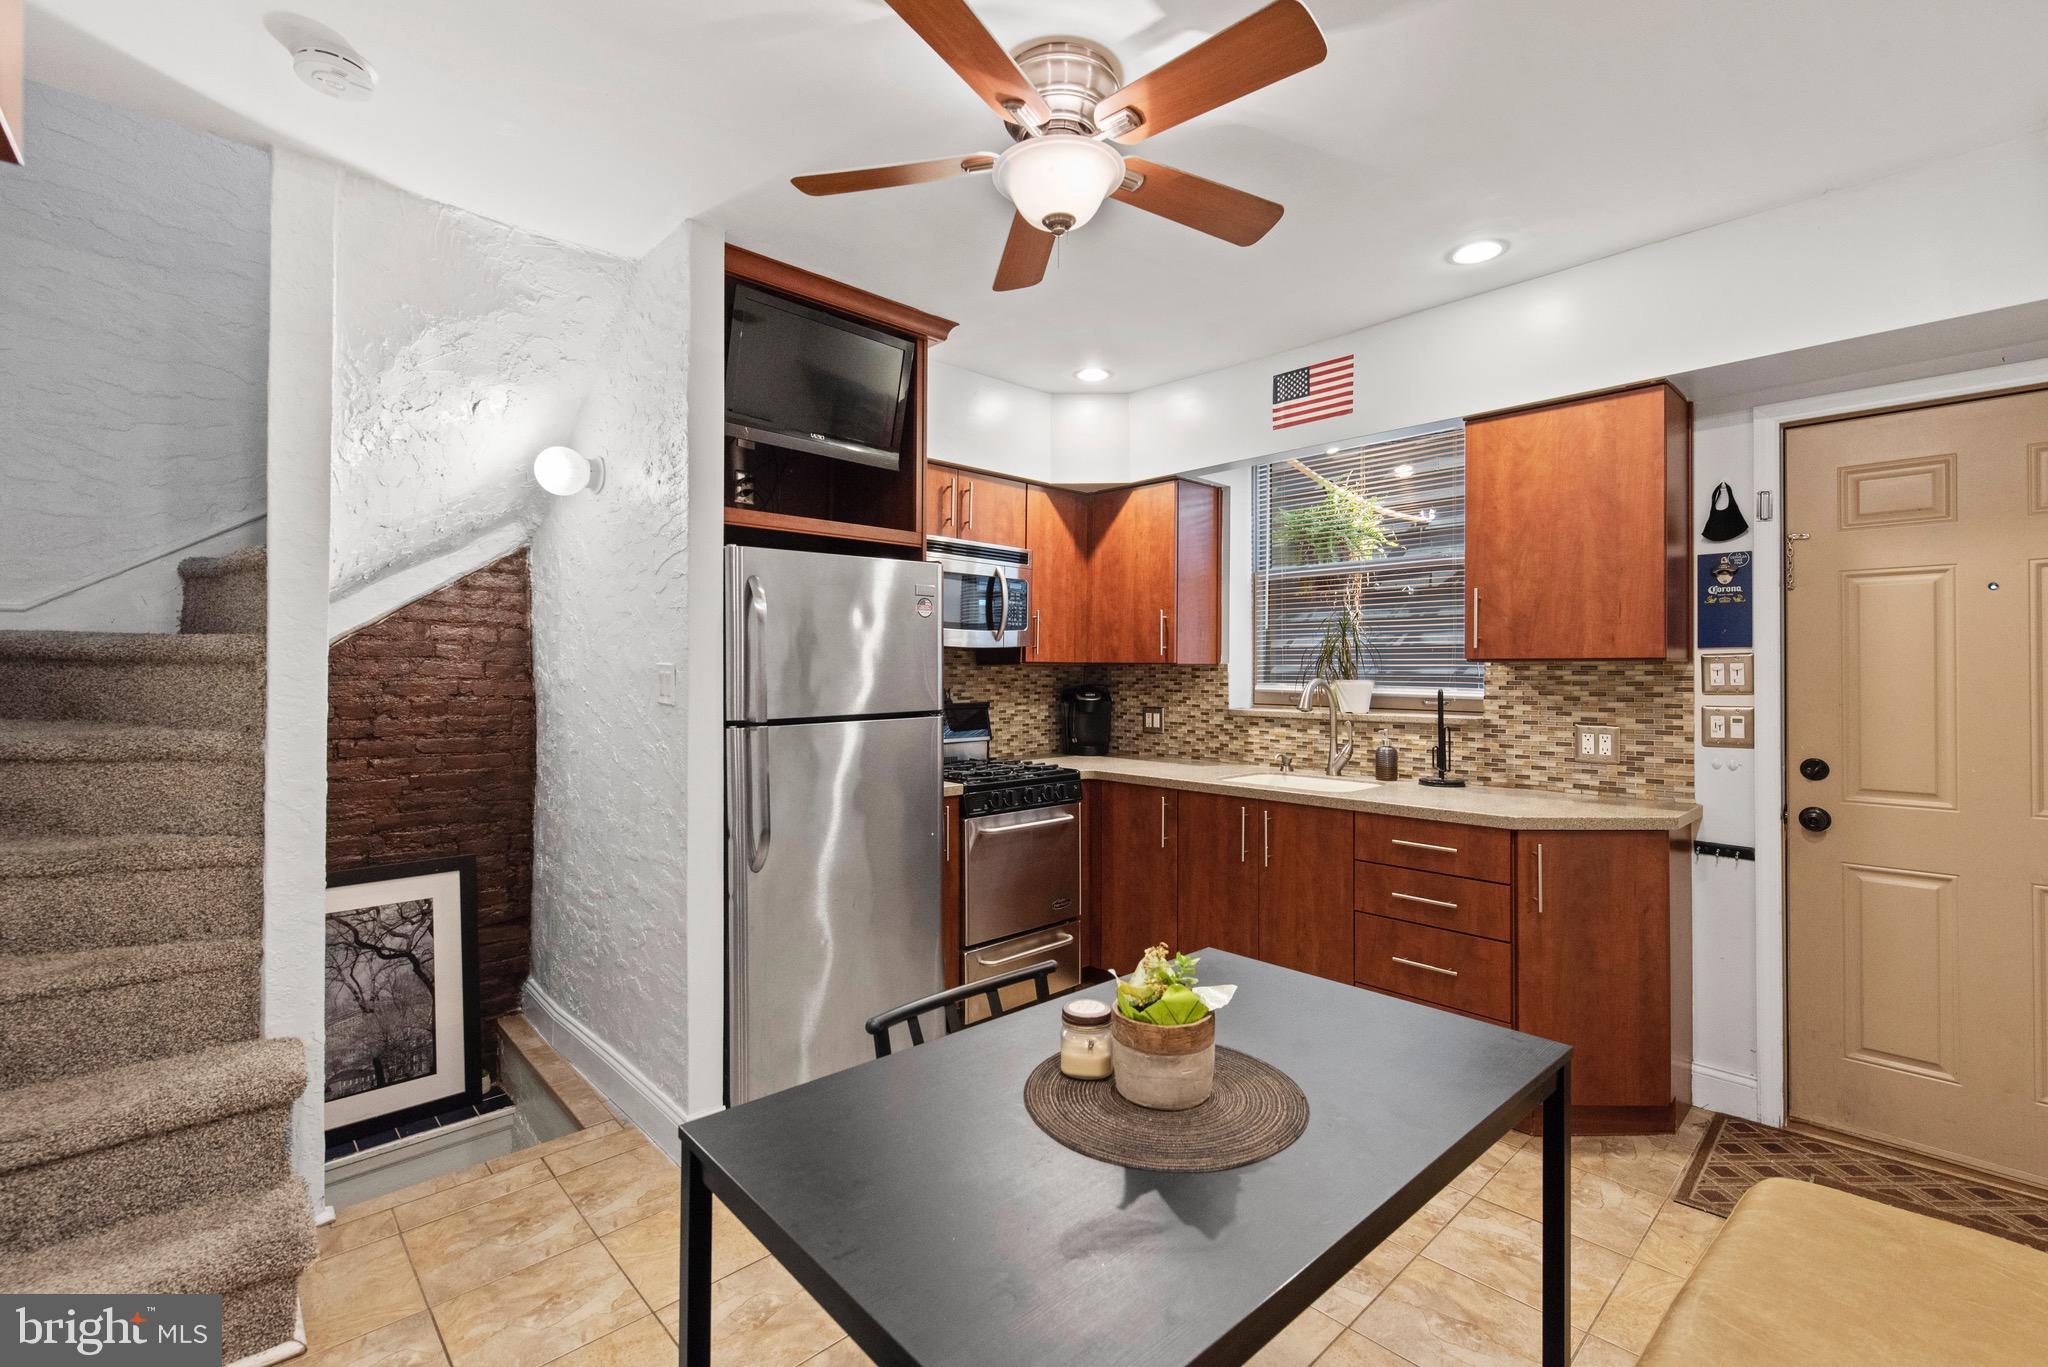 a kitchen with stainless steel appliances kitchen island granite countertop a refrigerator a stove and a sink